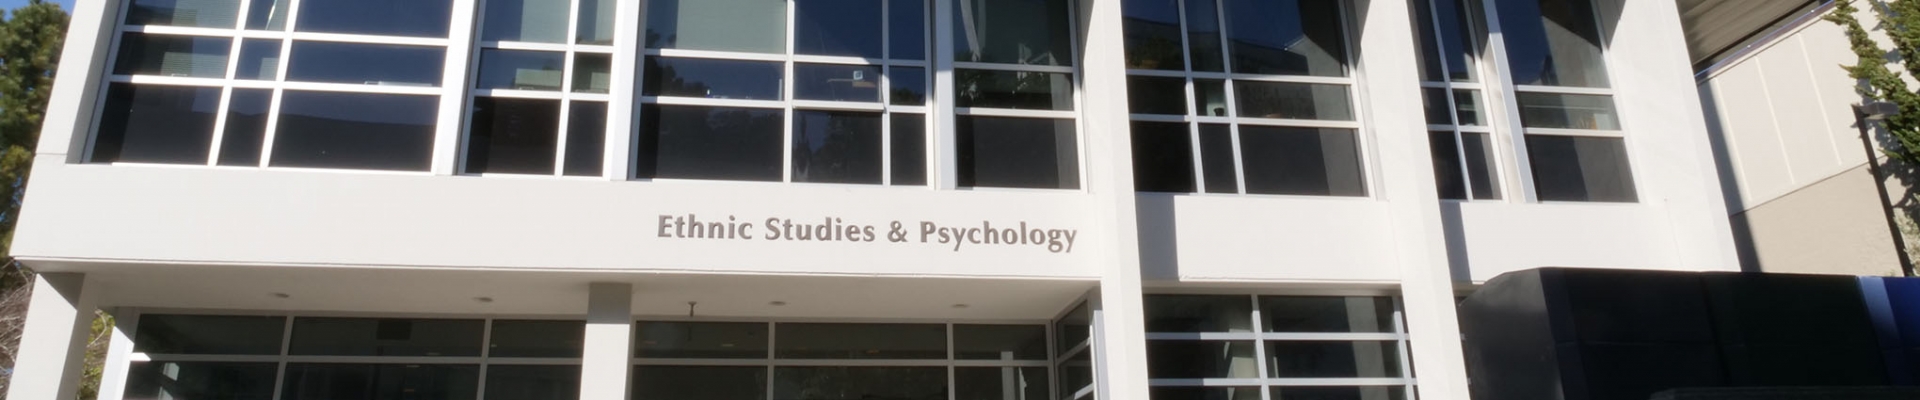 the SFSU Ethnic Studies and Psychology Building's entrance during day